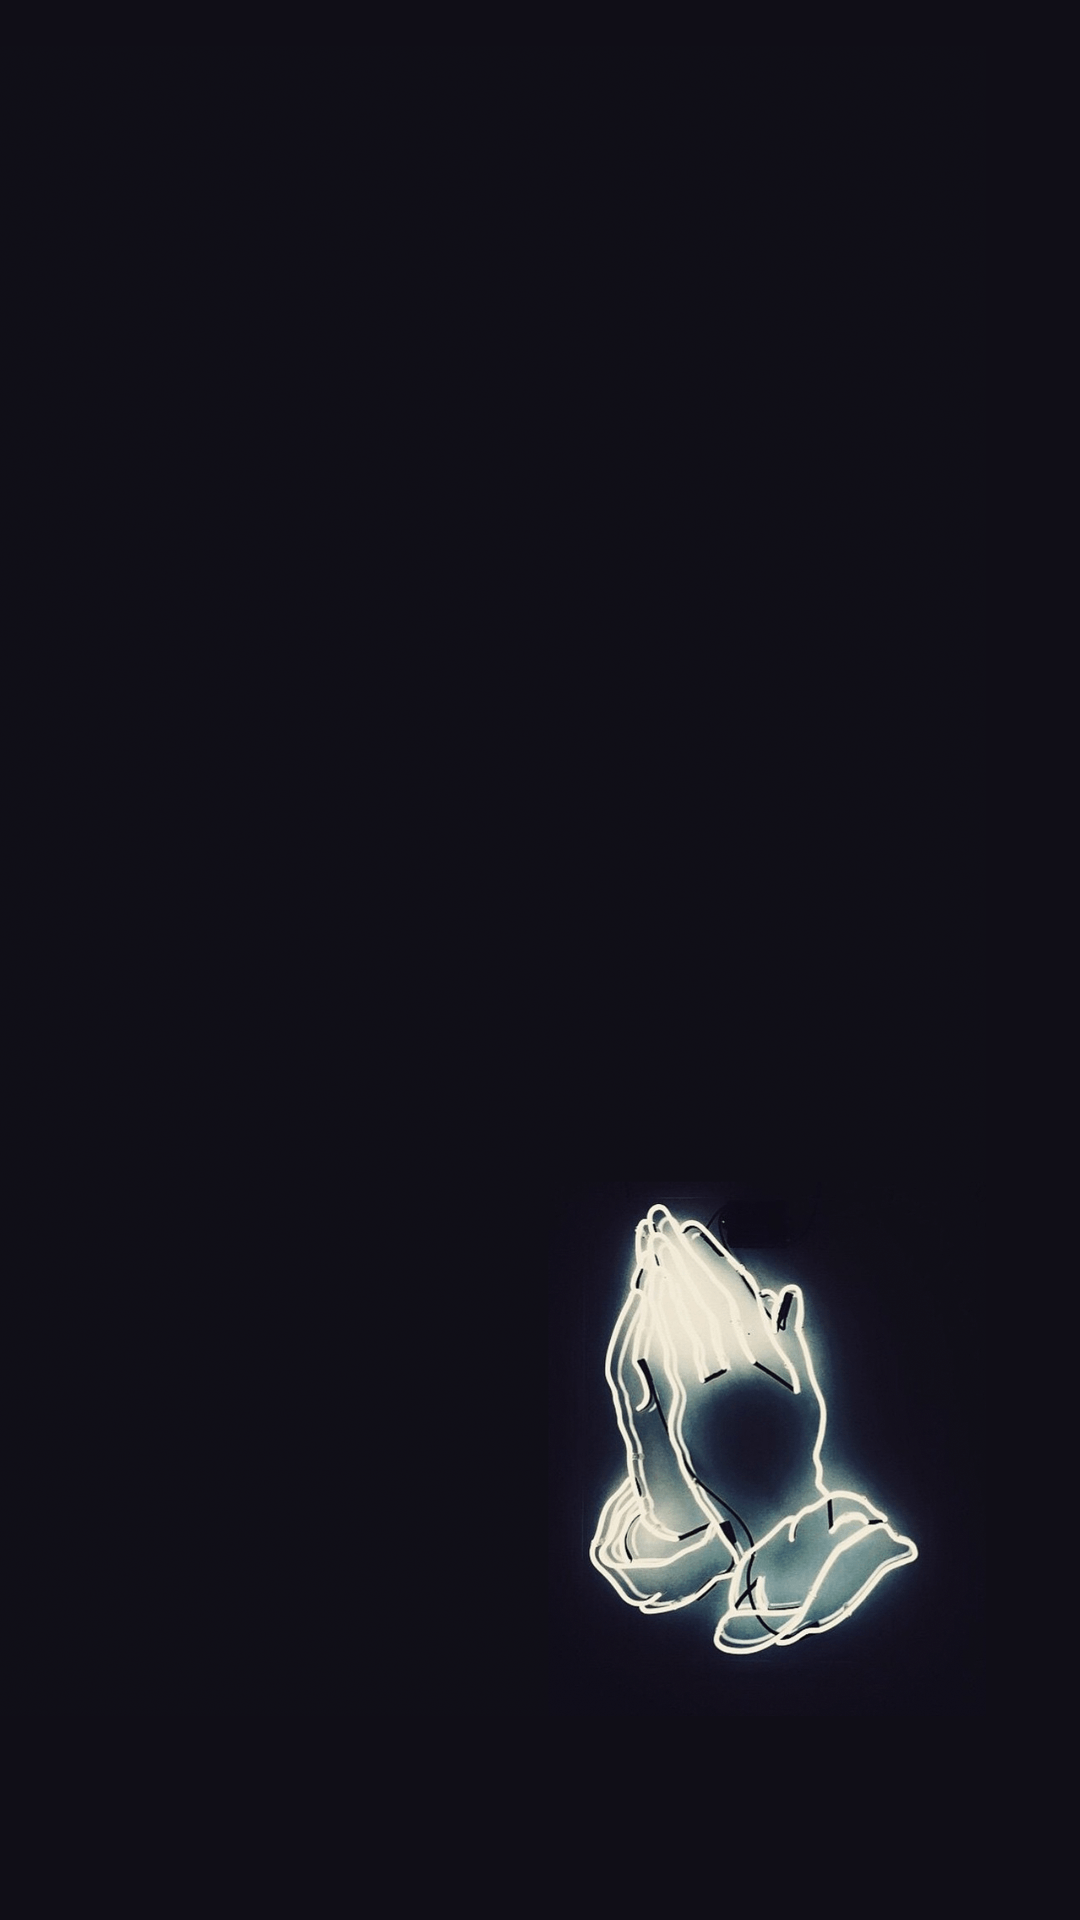 1080x1920 Kanye West Hd Wallpaper For Iphone 7 Wallpaper Picture